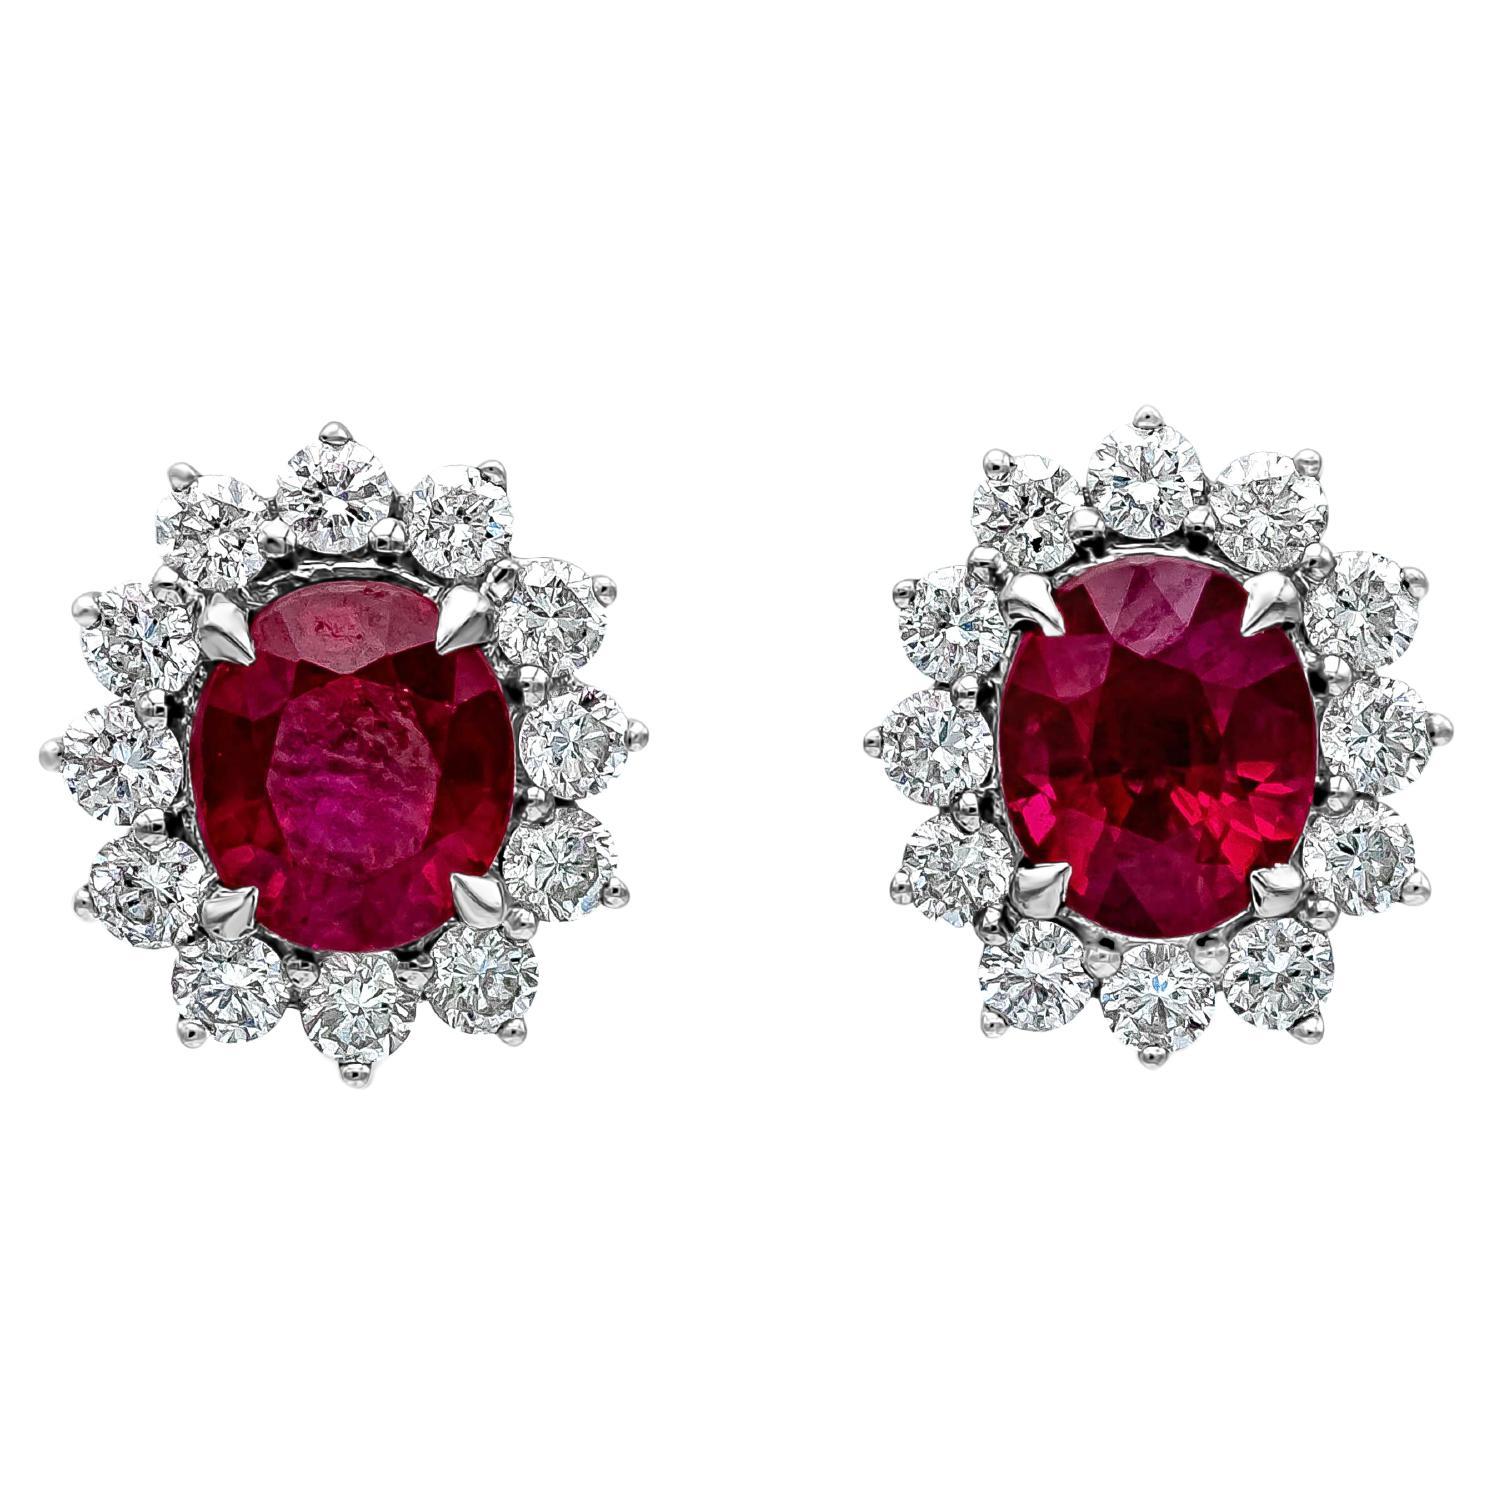 A classic pair of stud earrings showcasing vibrant red oval cut rubies, surrounded by a single row of round brilliant diamonds in a floral motif design. Rubies weigh 2.09 carats total, diamonds weigh 0.59 carats total. Made in 18K White Gold.

Roman